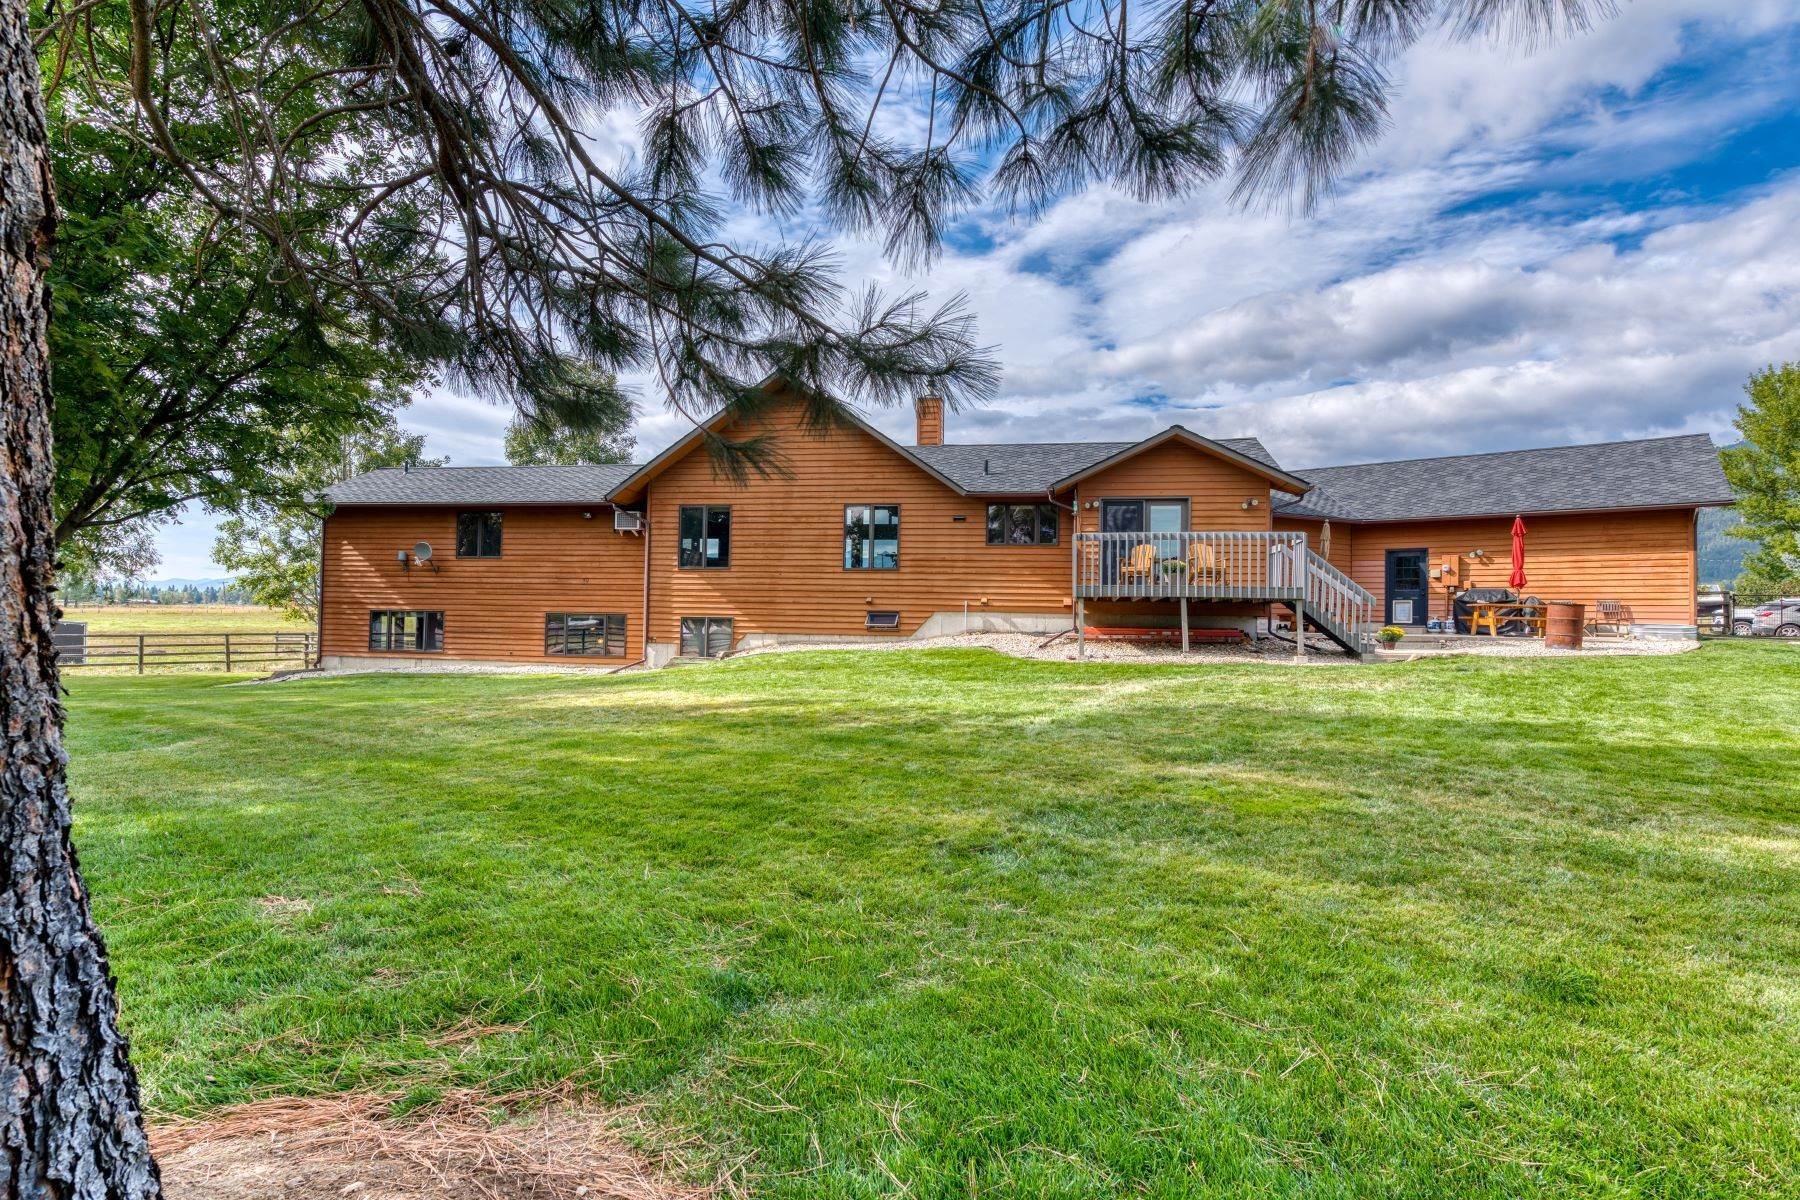 27. Farm and Ranch Properties for Sale at 3214 Mittower Road Victor, Montana 59875 United States